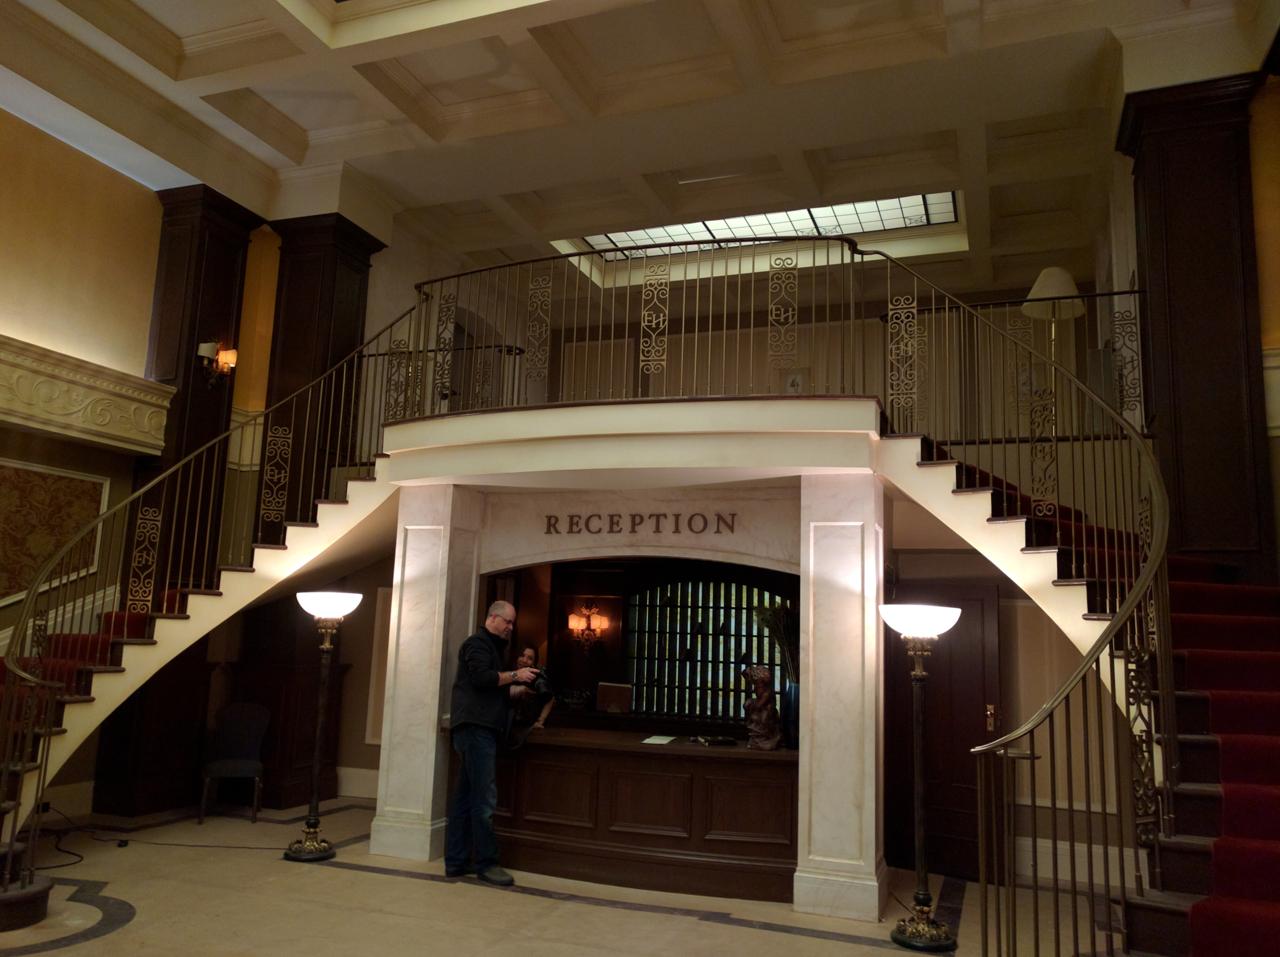 The hotel lobby, which will be featured prominently during season two